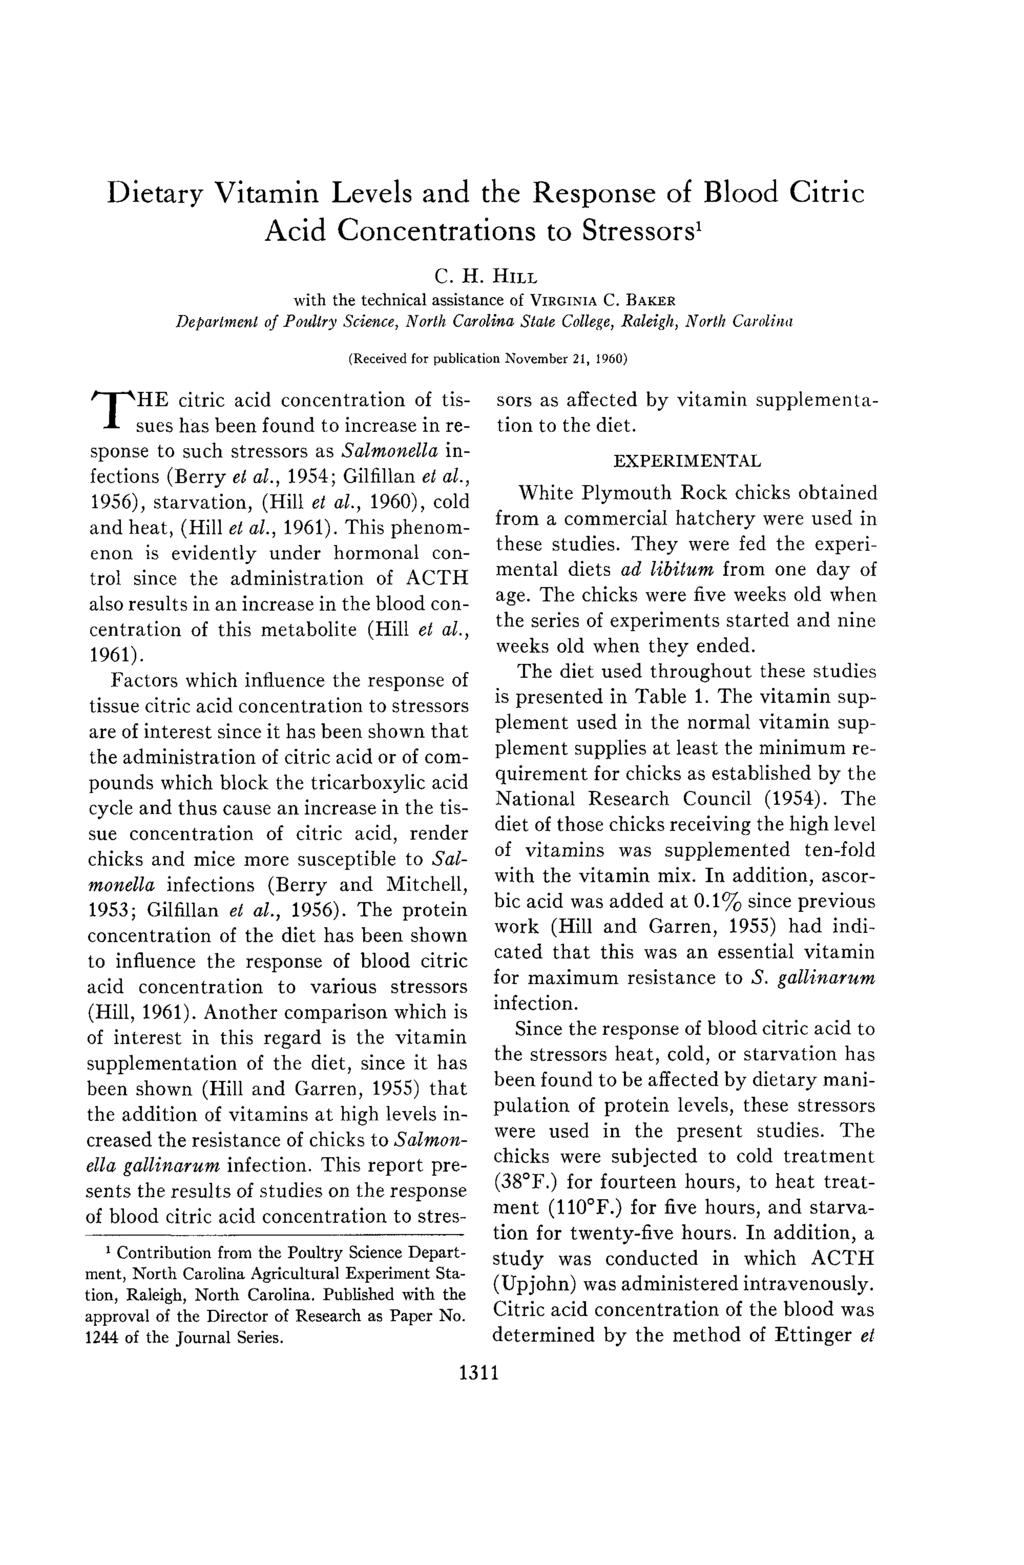 Dietary Vitamin Levels and the Response of Blood Citric Acid Concentrations to Stressors 1 C. H. HILL with the technical assistance of VIRGINIA C.